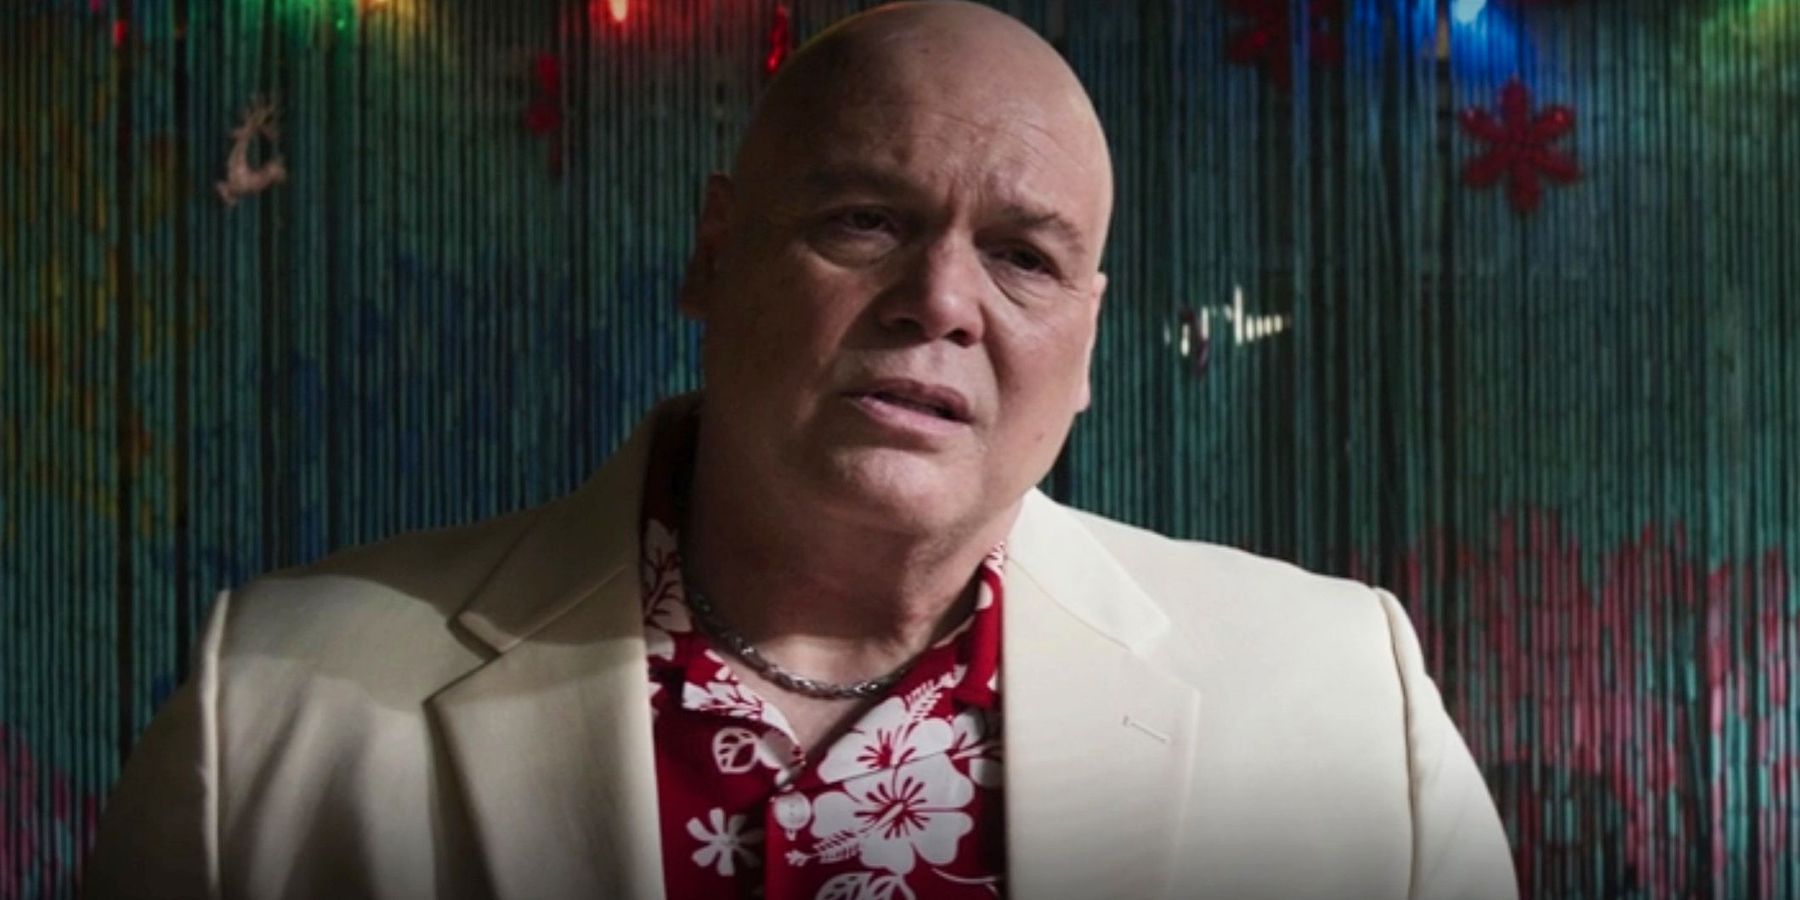 Wilson Fisk, or Kingpin, in the series "Hawkeye" from Disney+. 